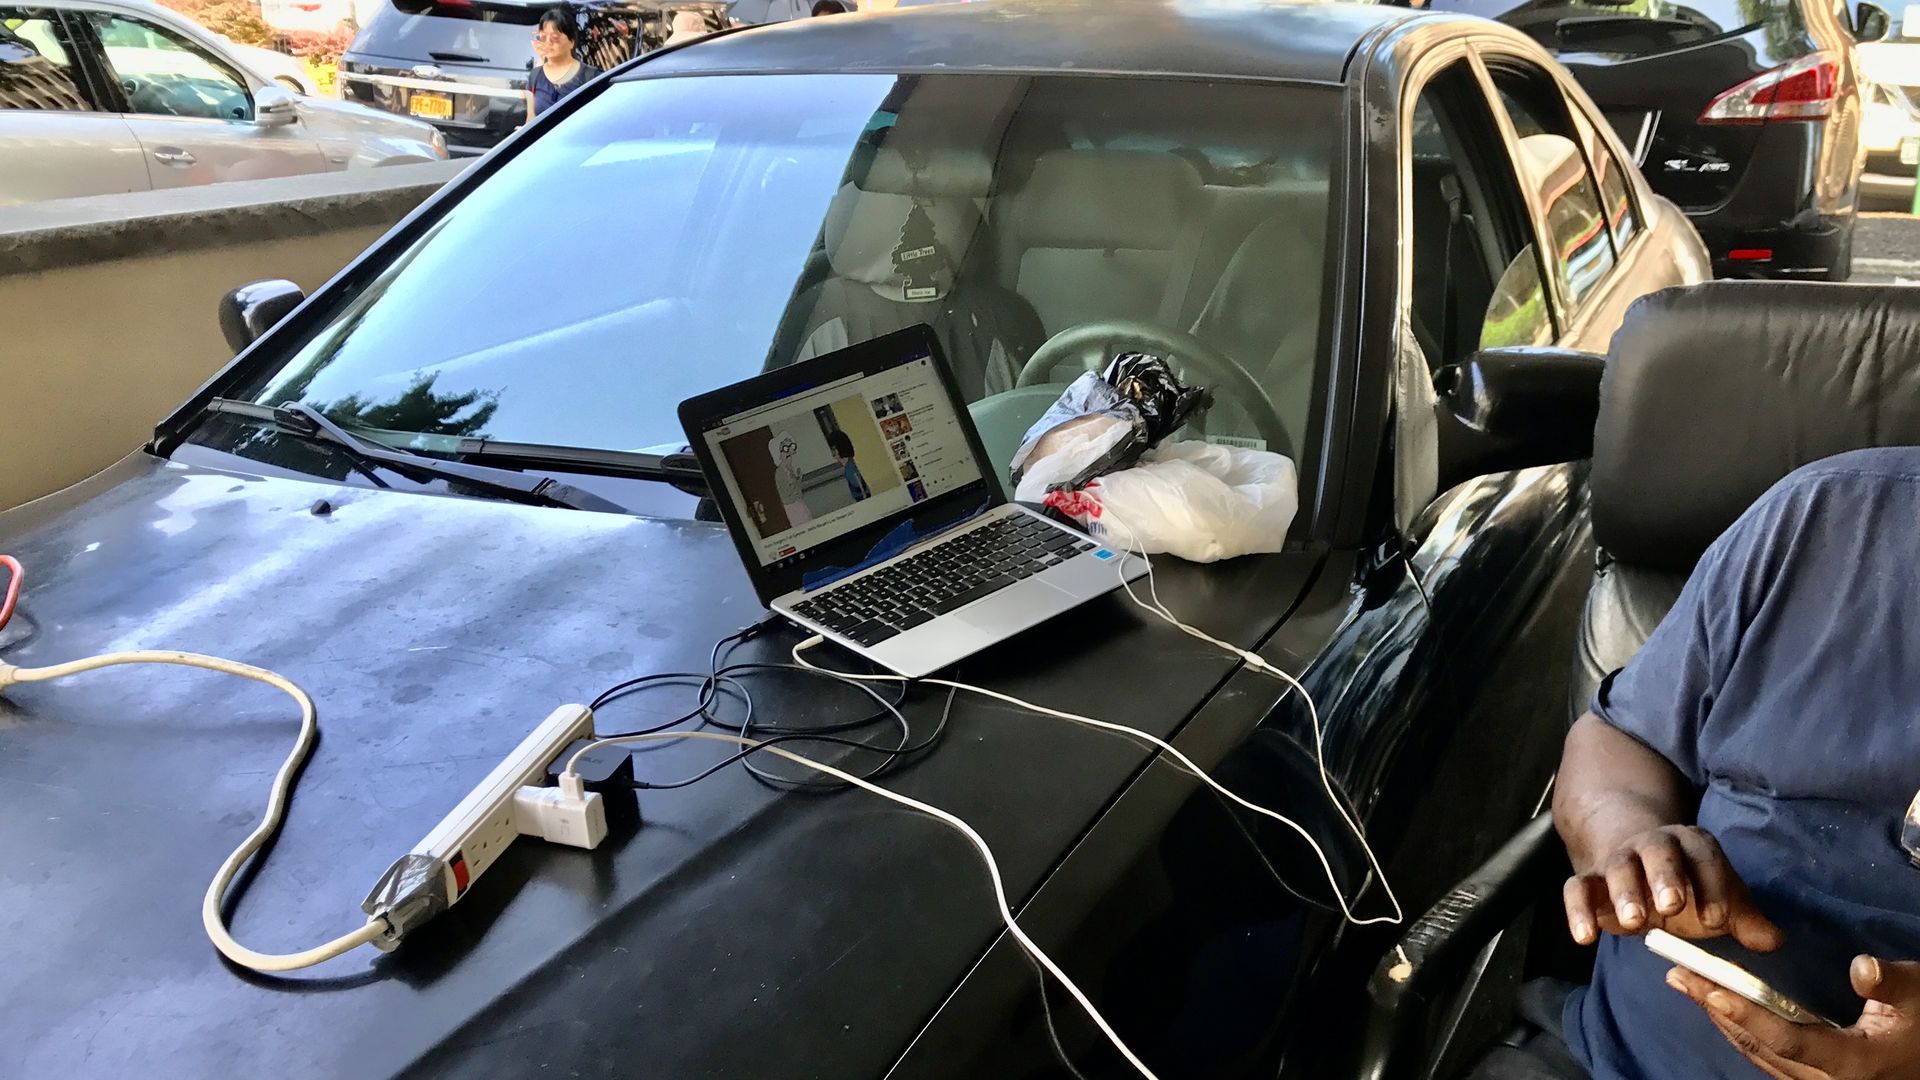 A man charges his laptop and phone while sitting next to his car and using the car's battery power for juice.